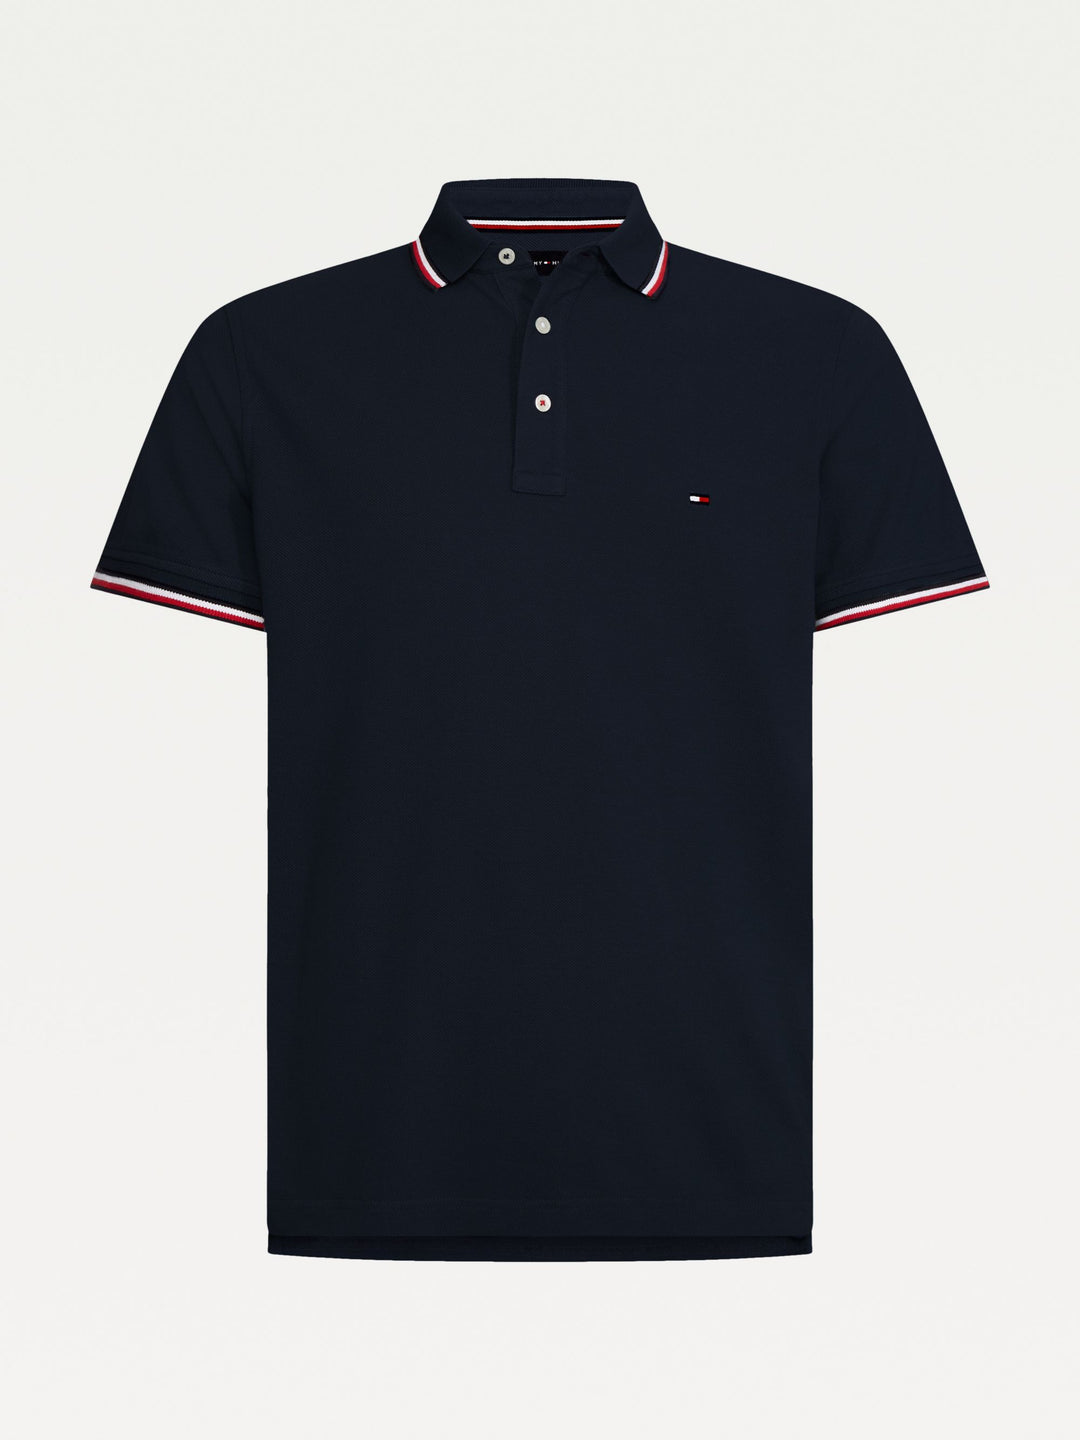 TH CORE TIPPED SLIM POLO - NAVY